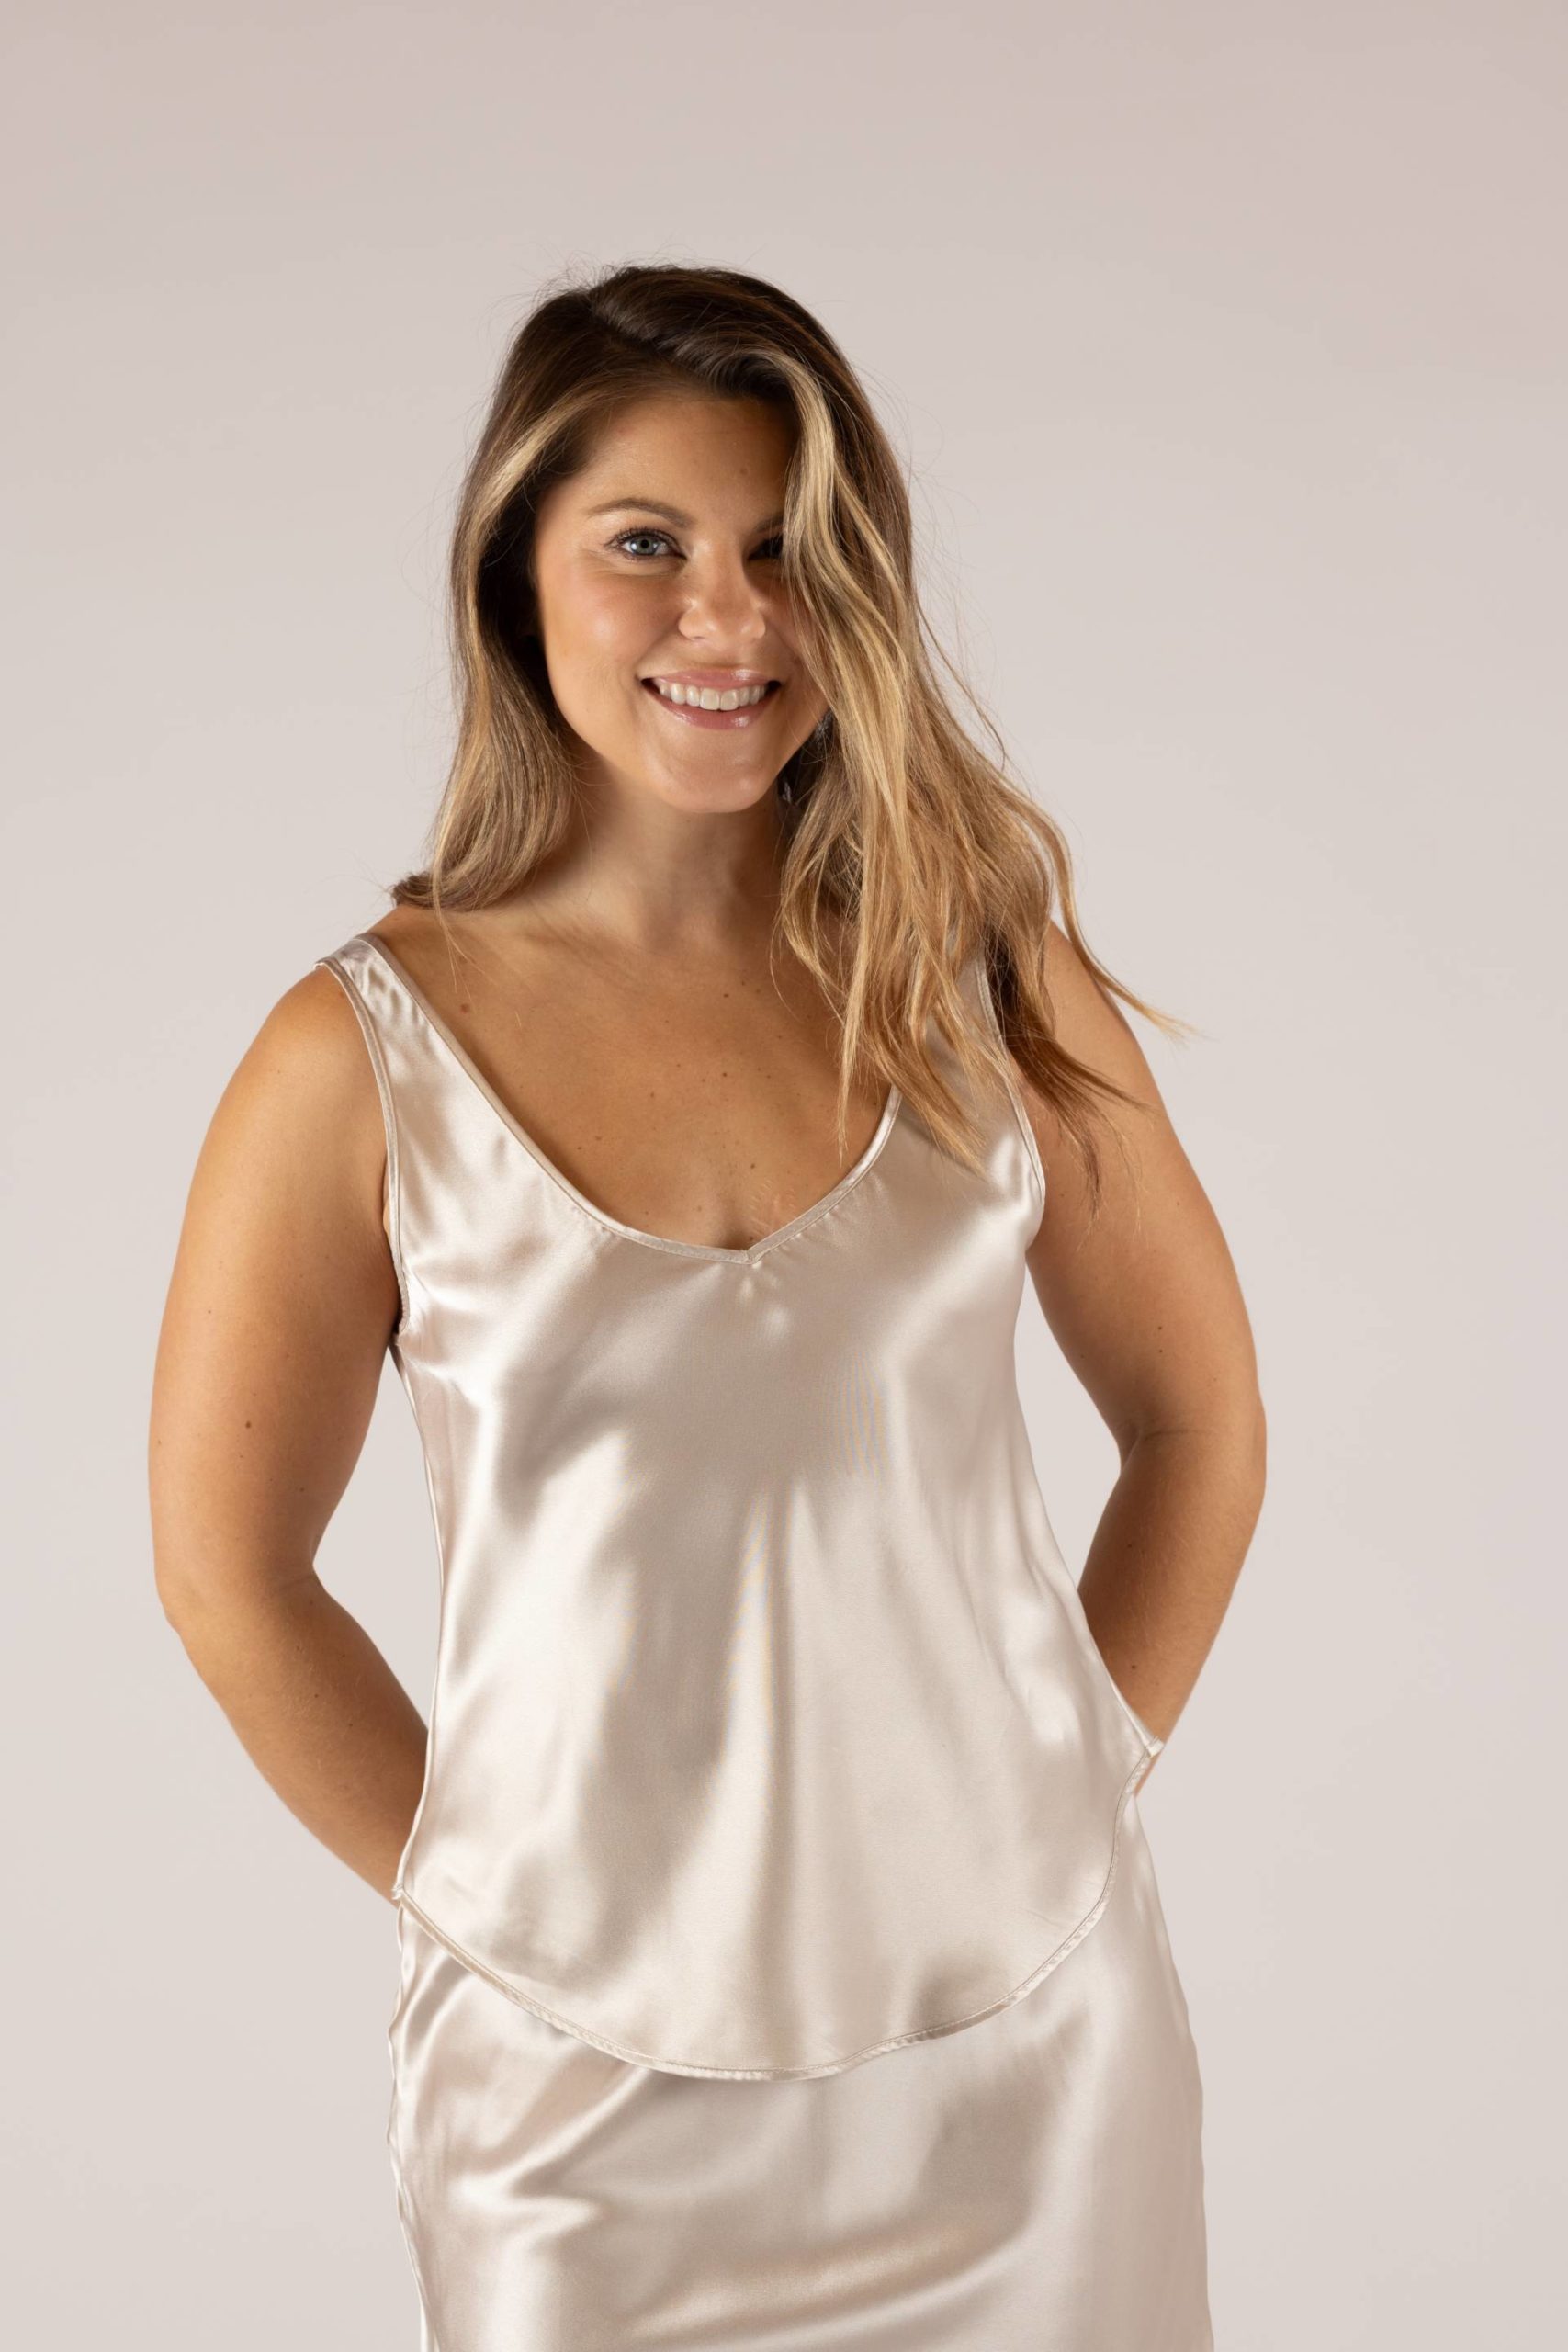 Women's Camisoles with Lace, Cotton & Nylon